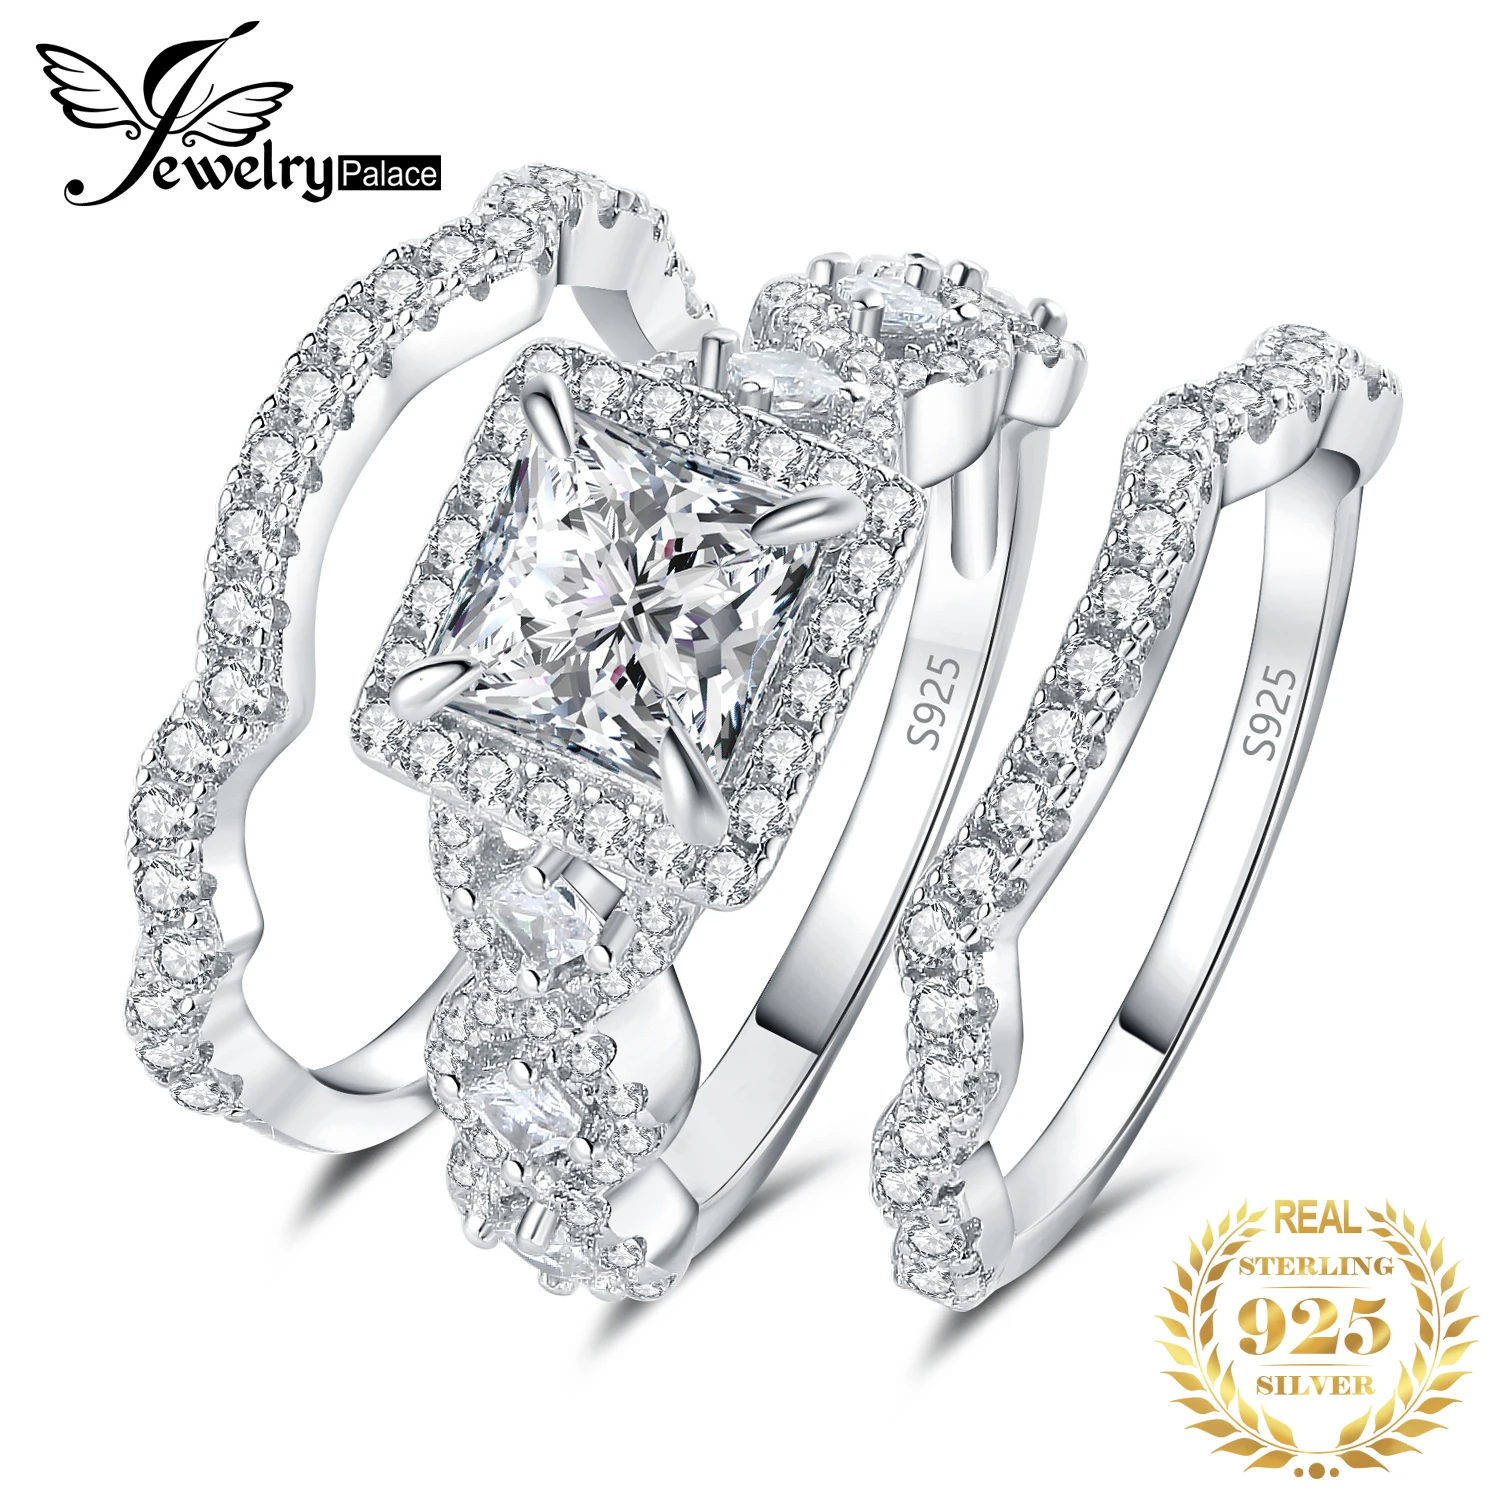 JewelryPalace 3Pcs 925 Sterling Silver Halo Wedding Engagement Ring Set for  Women 2.9ct Princess Cut AAAAAA CZ Fashion Jewelry